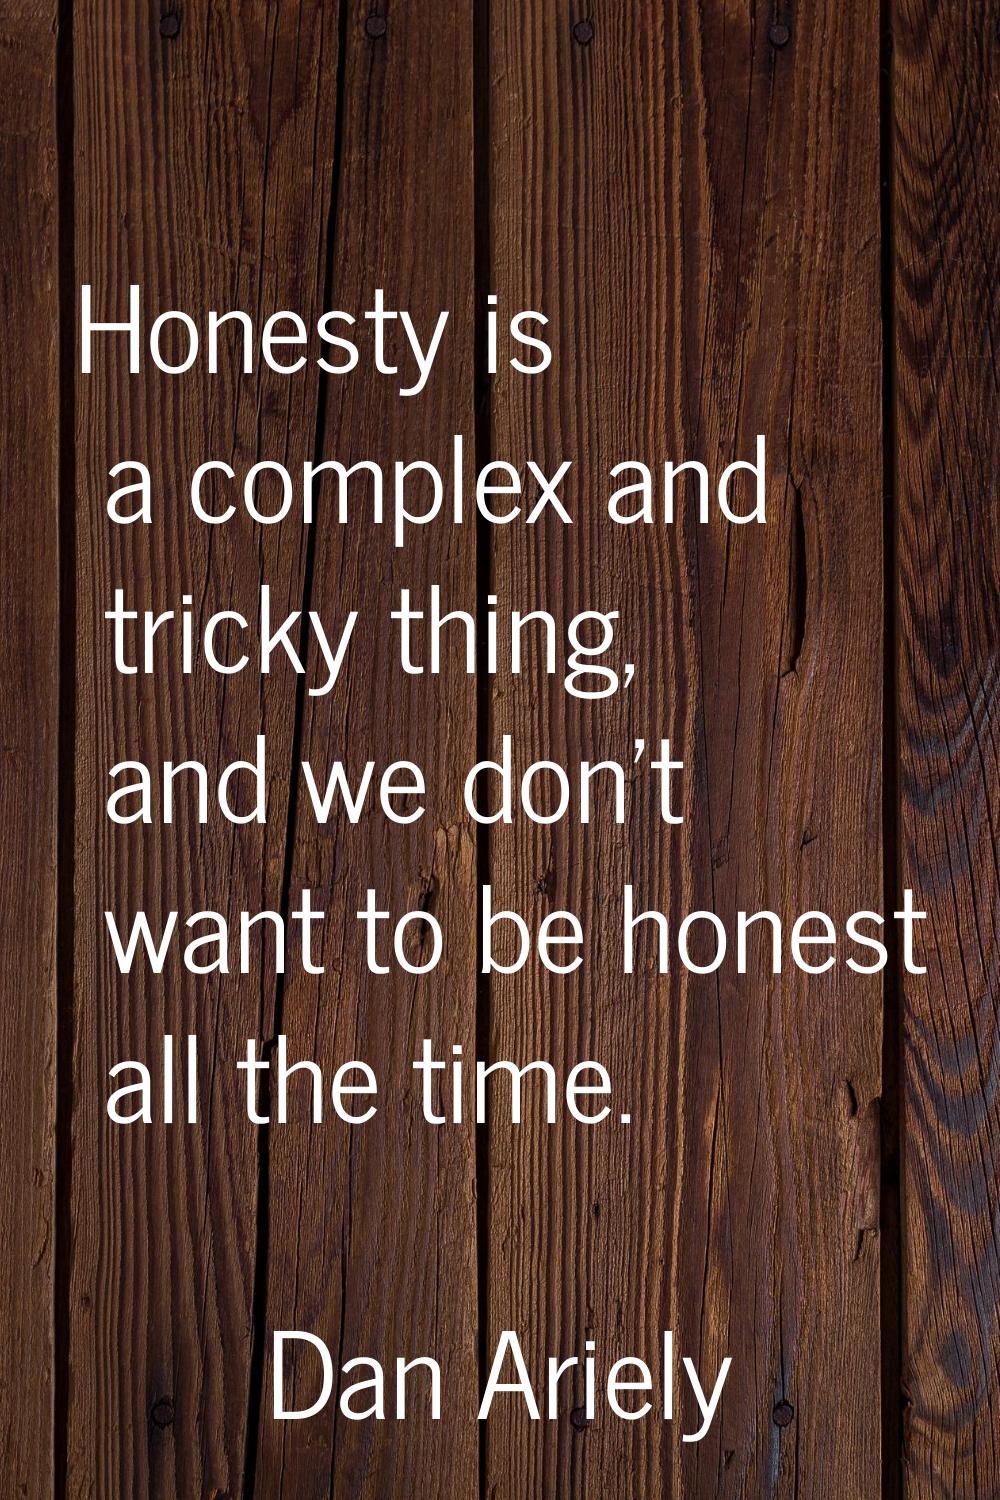 Honesty is a complex and tricky thing, and we don't want to be honest all the time.